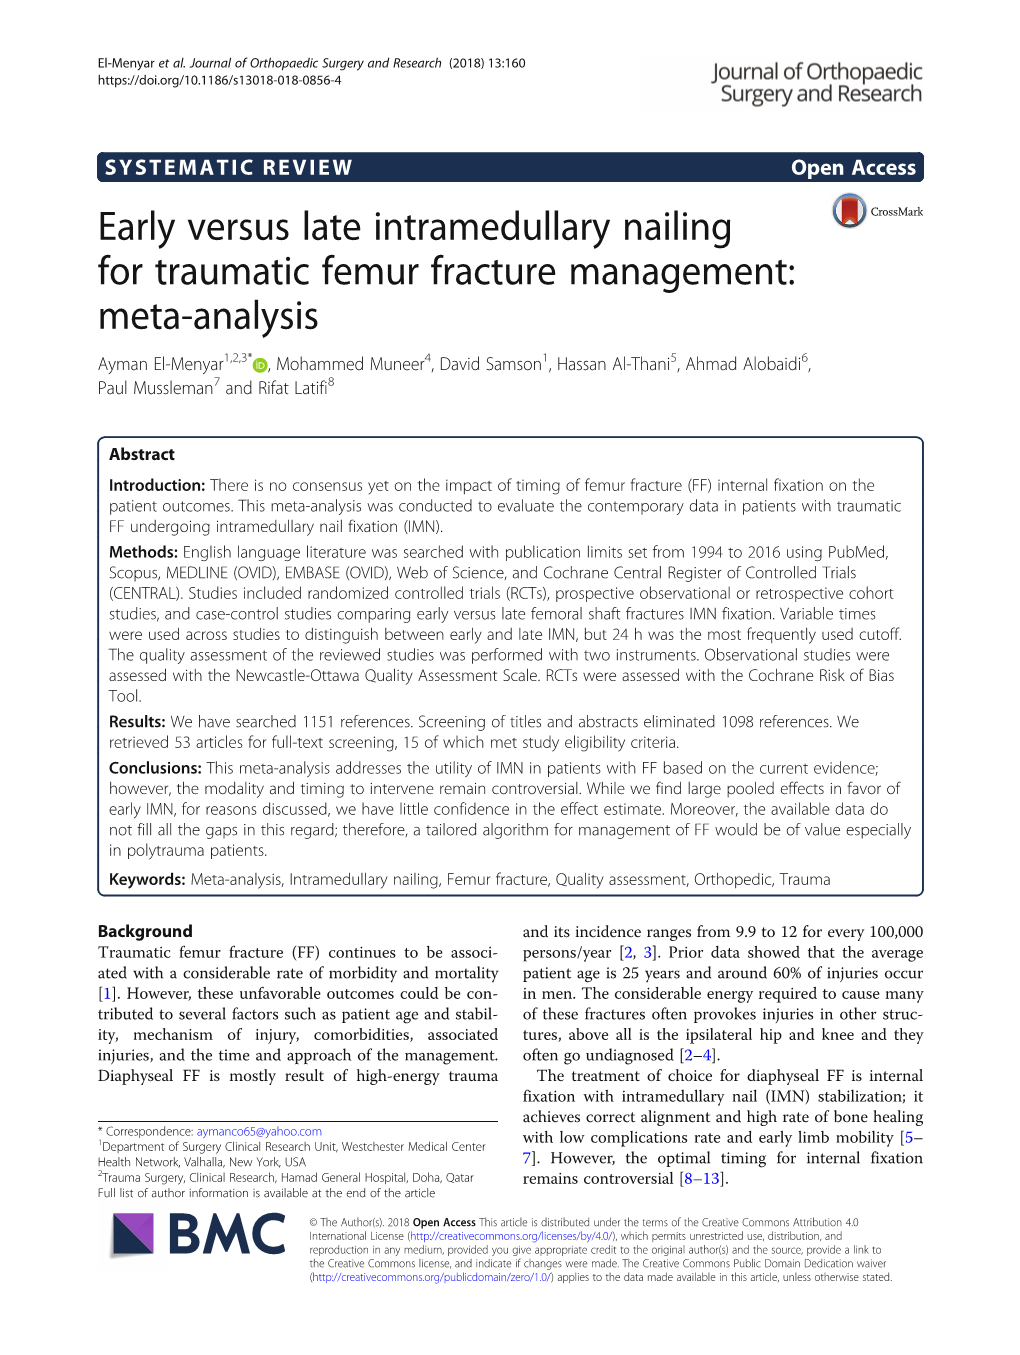 Early Versus Late Intramedullary Nailing for Traumatic Femur Fracture